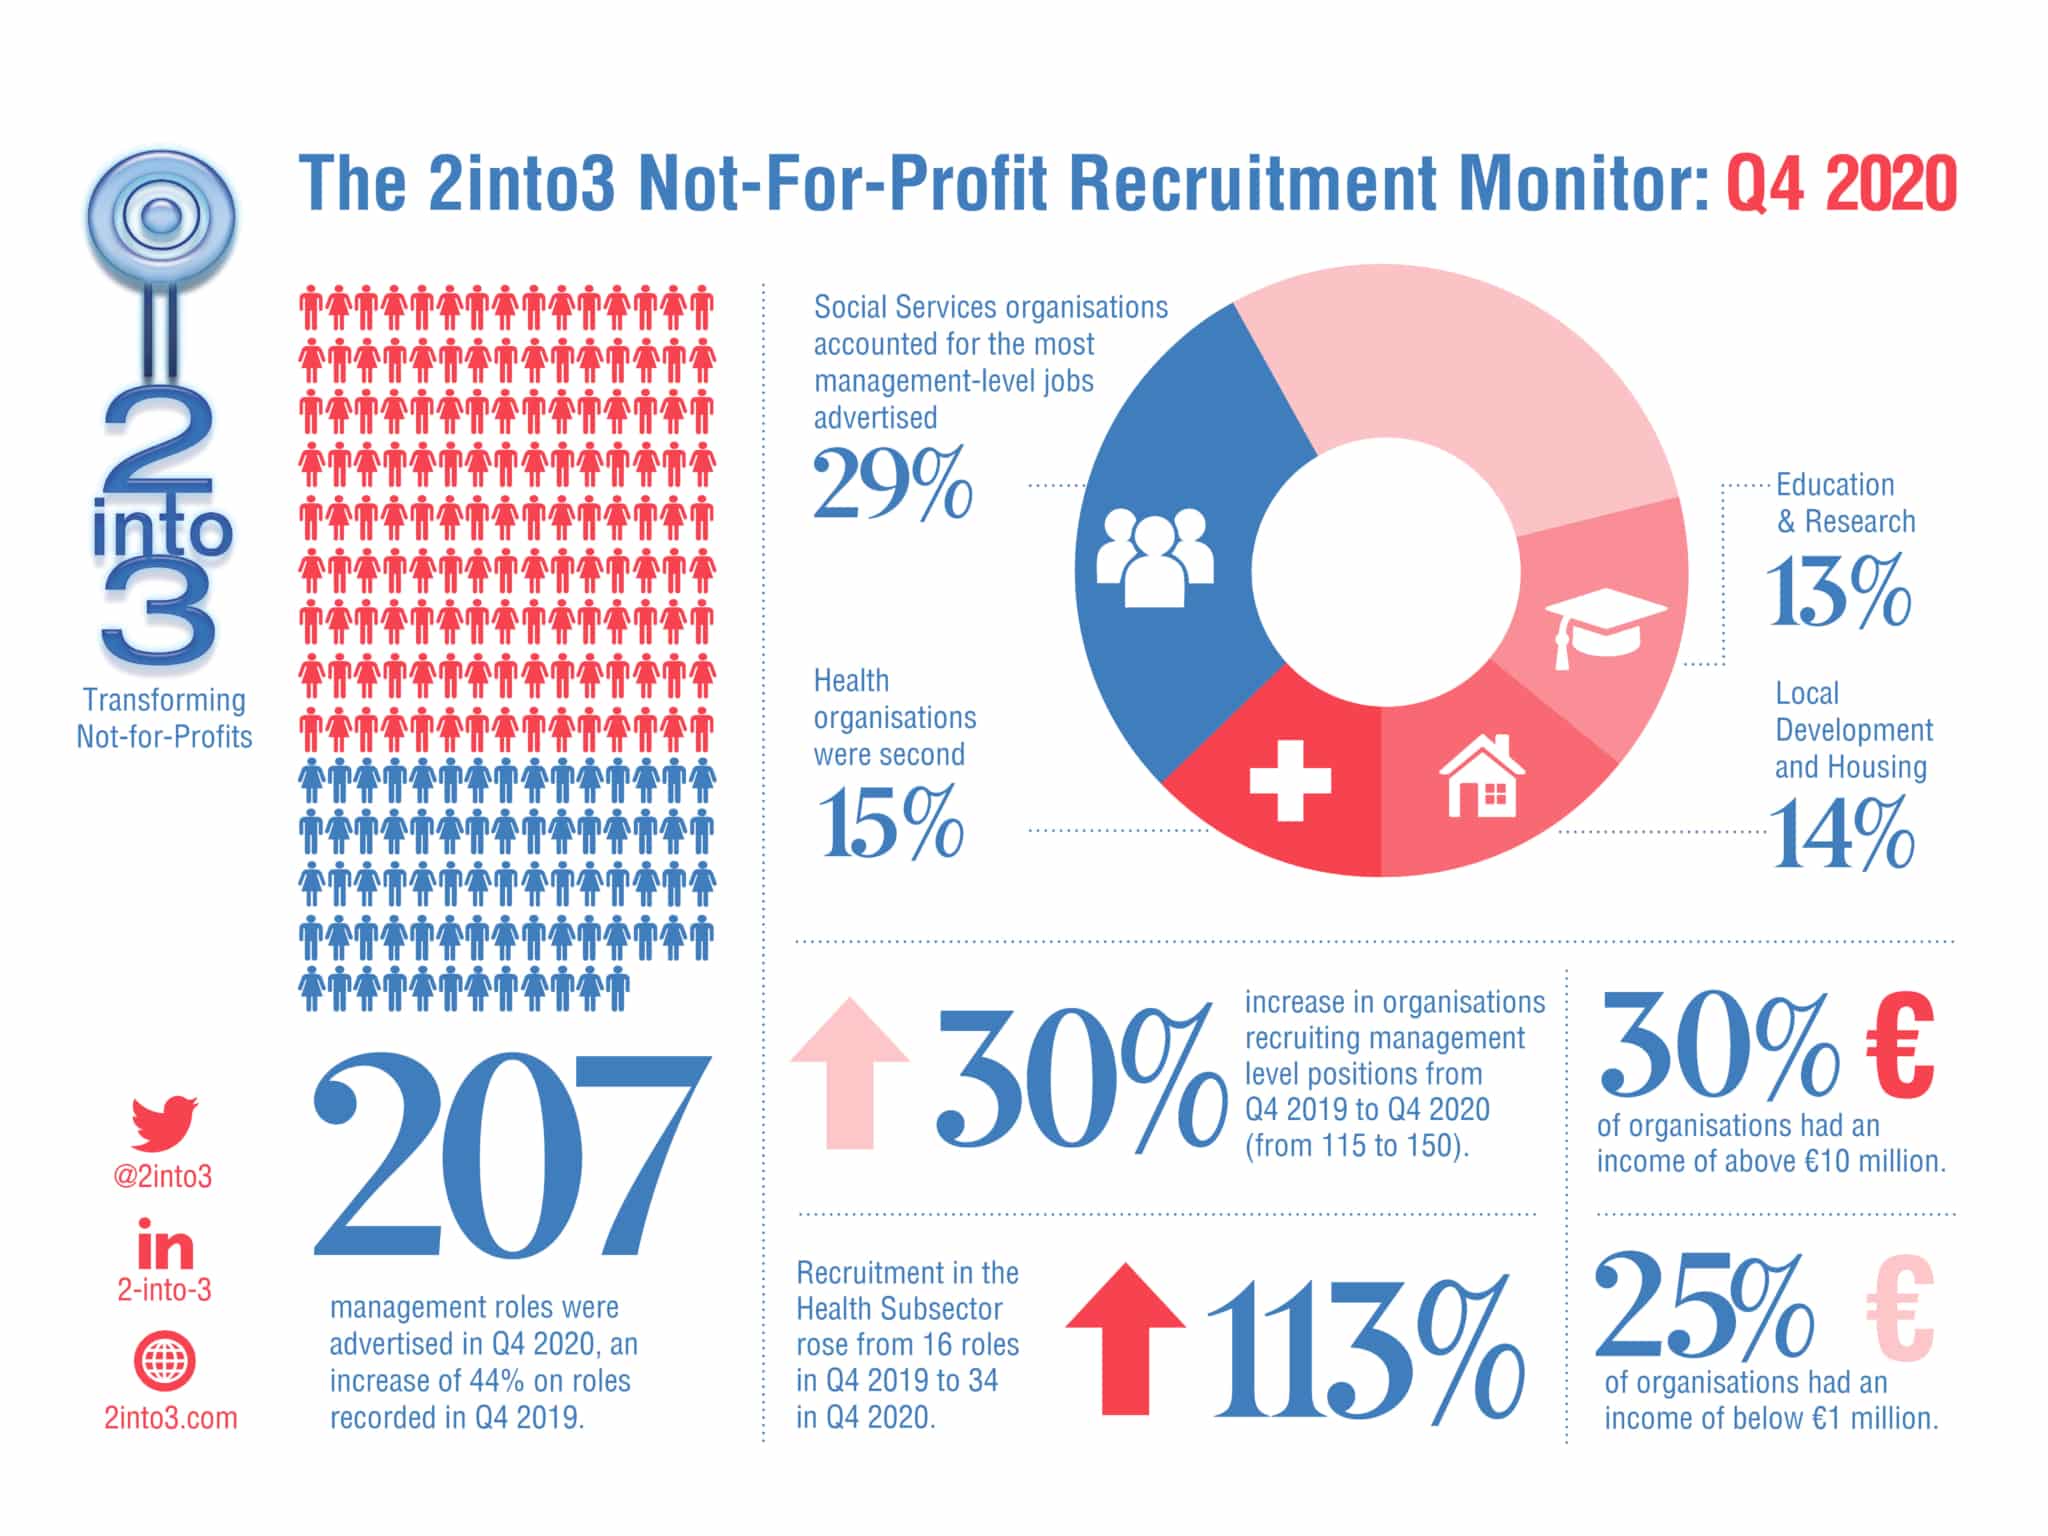 2into3 Quarterly Recruitment Monitor Q4 2020 for Not-for-Profit sector Ireland